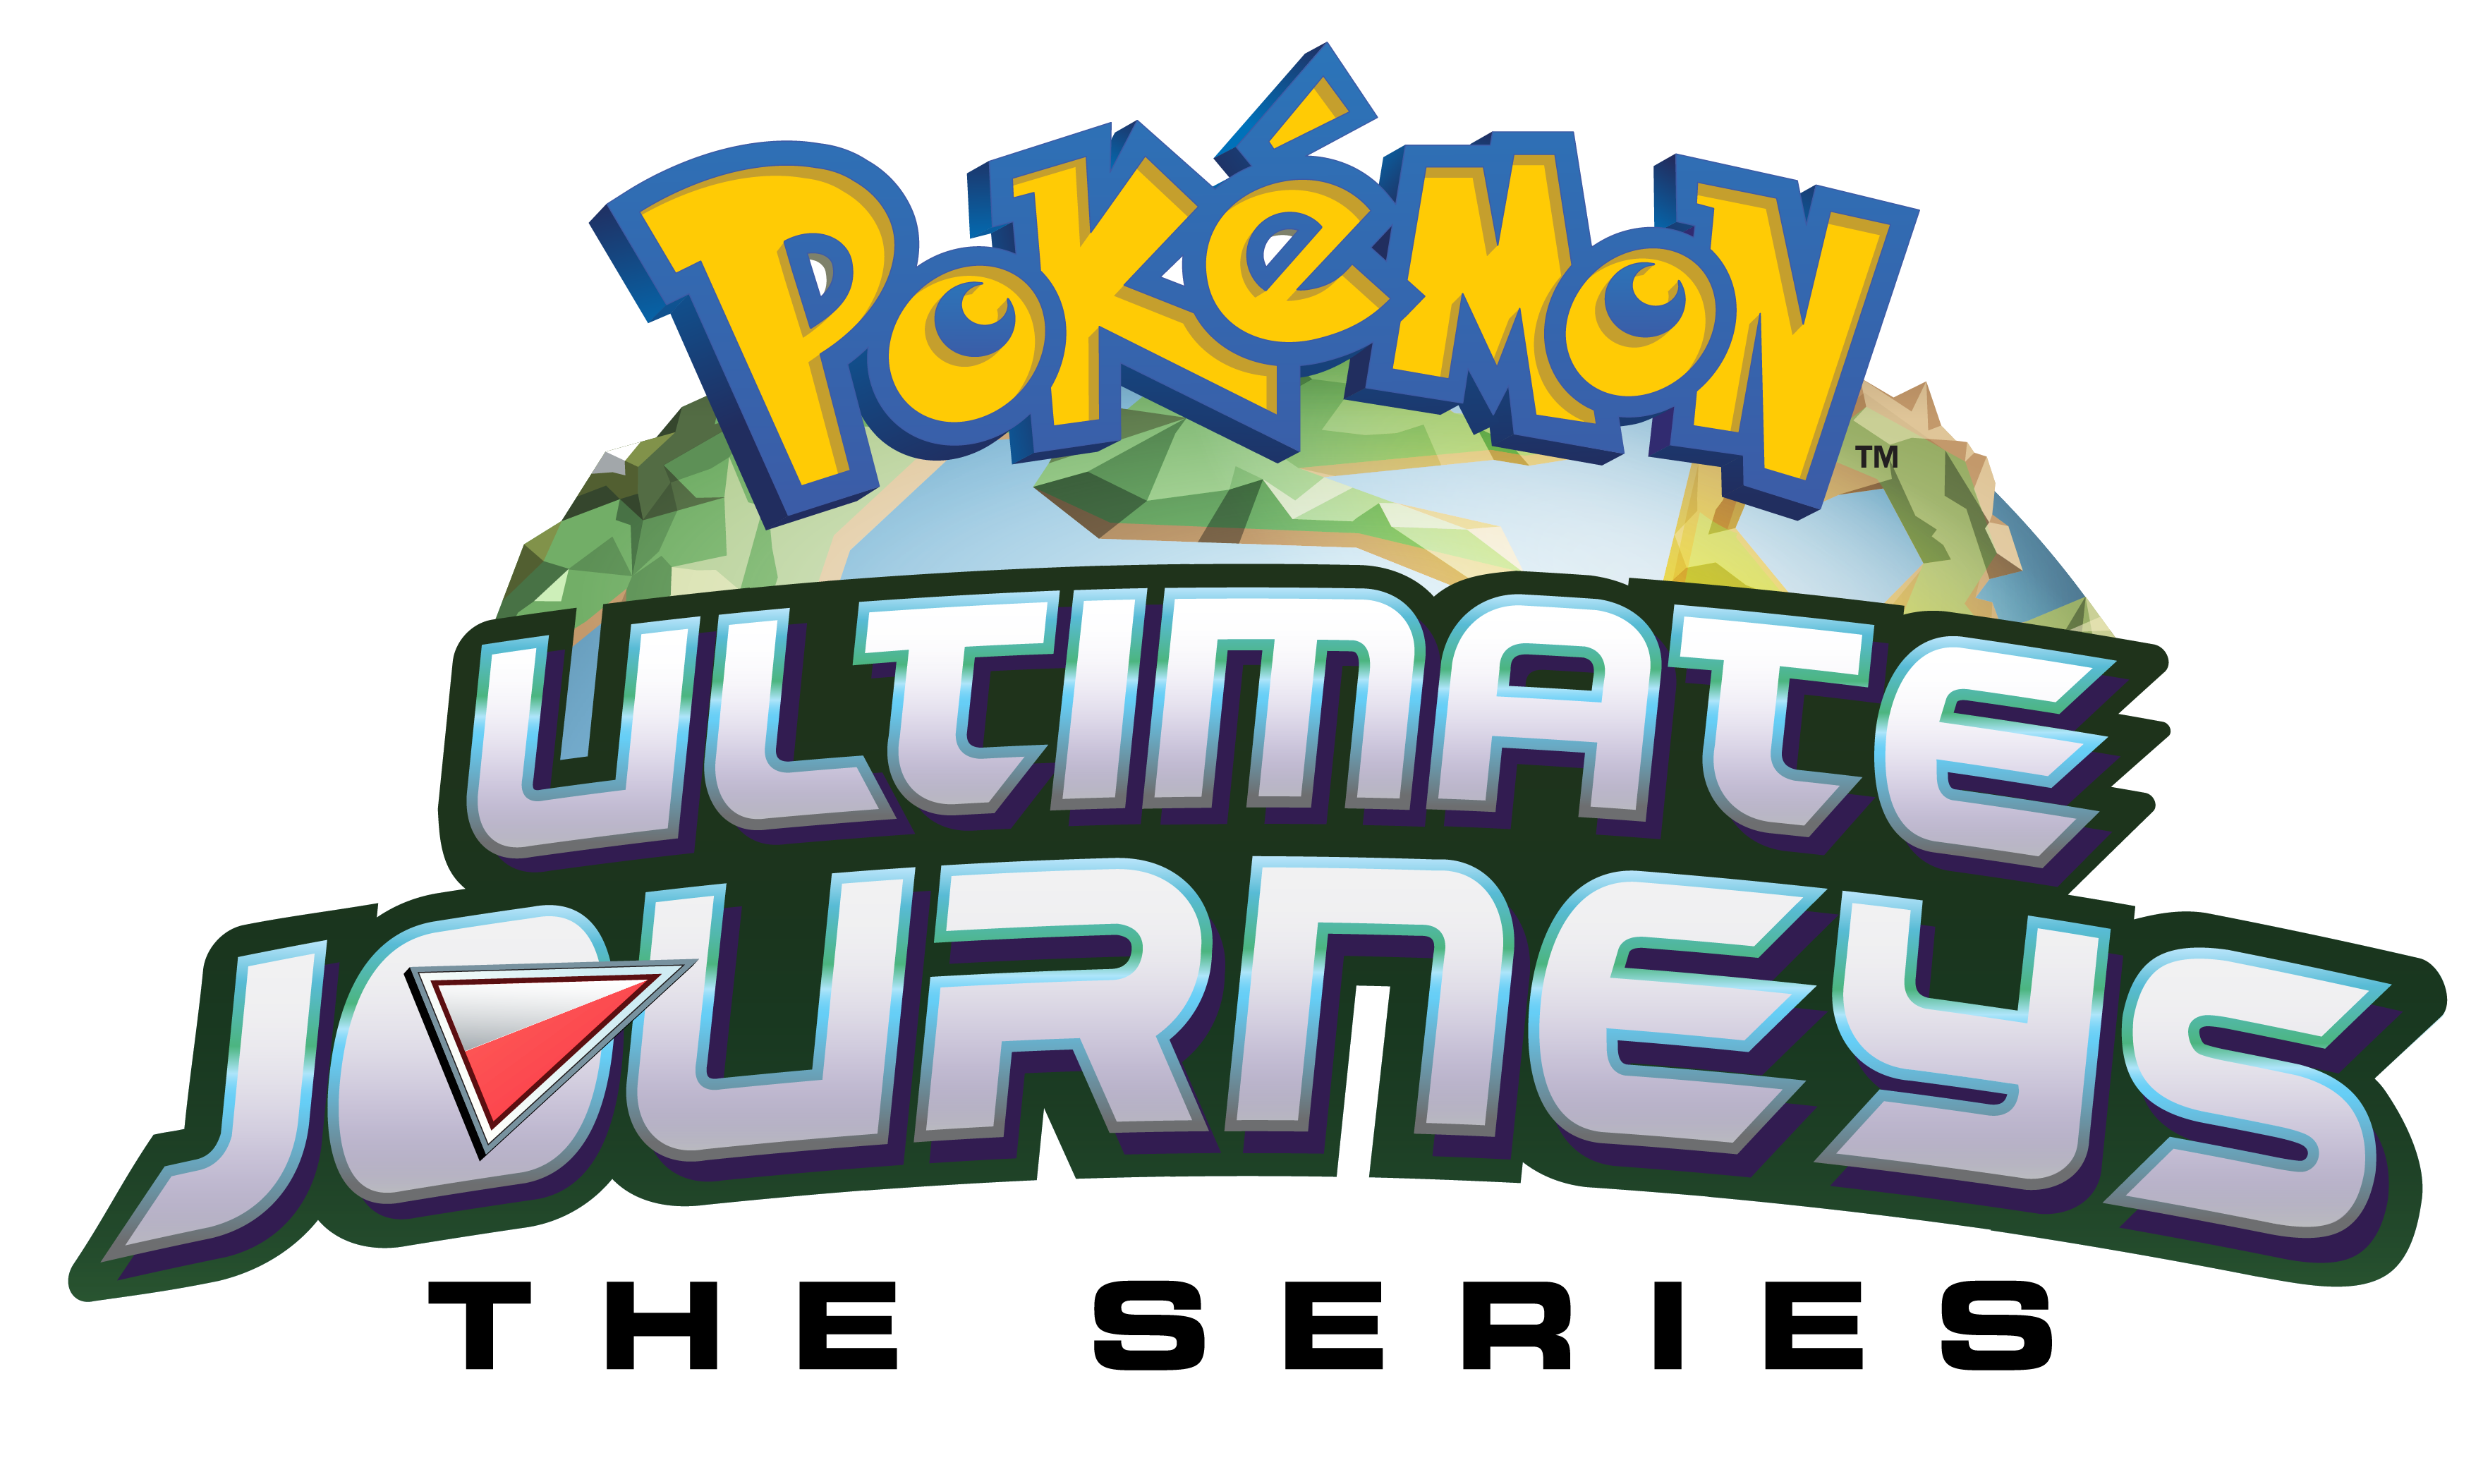 Pokémon Ultimate Journeys: The Series' Part 2 is Coming to Netflix